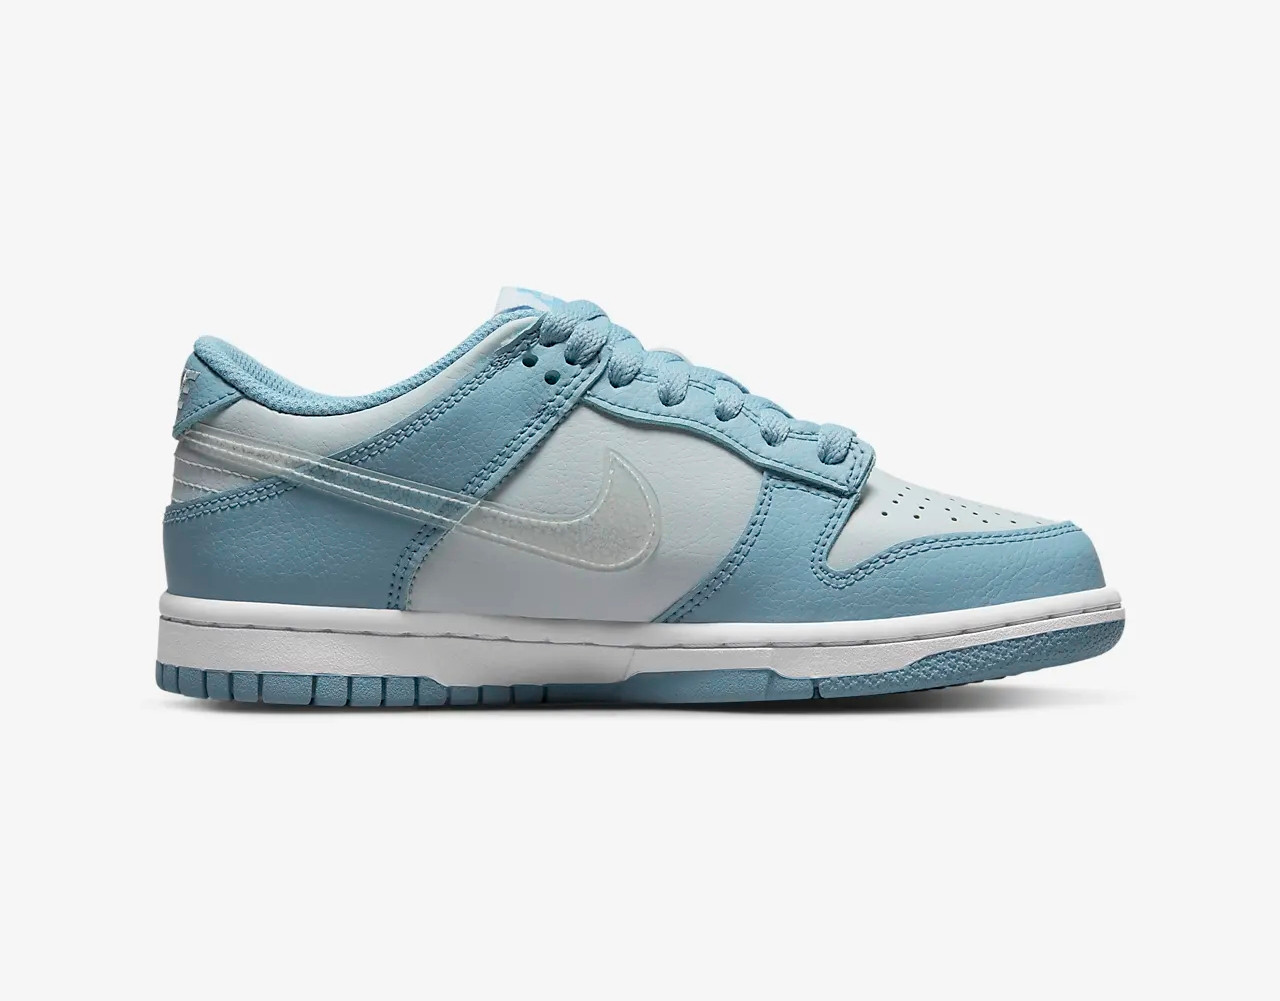 grote Oceaan Wedstrijd Verlichting nike air jordan 3 seoul price guide - 401 - Nike SB Dunk Low GS Clear Blue  Swoosh Aura Worn Blue White DH9765 - MultiscaleconsultingShops